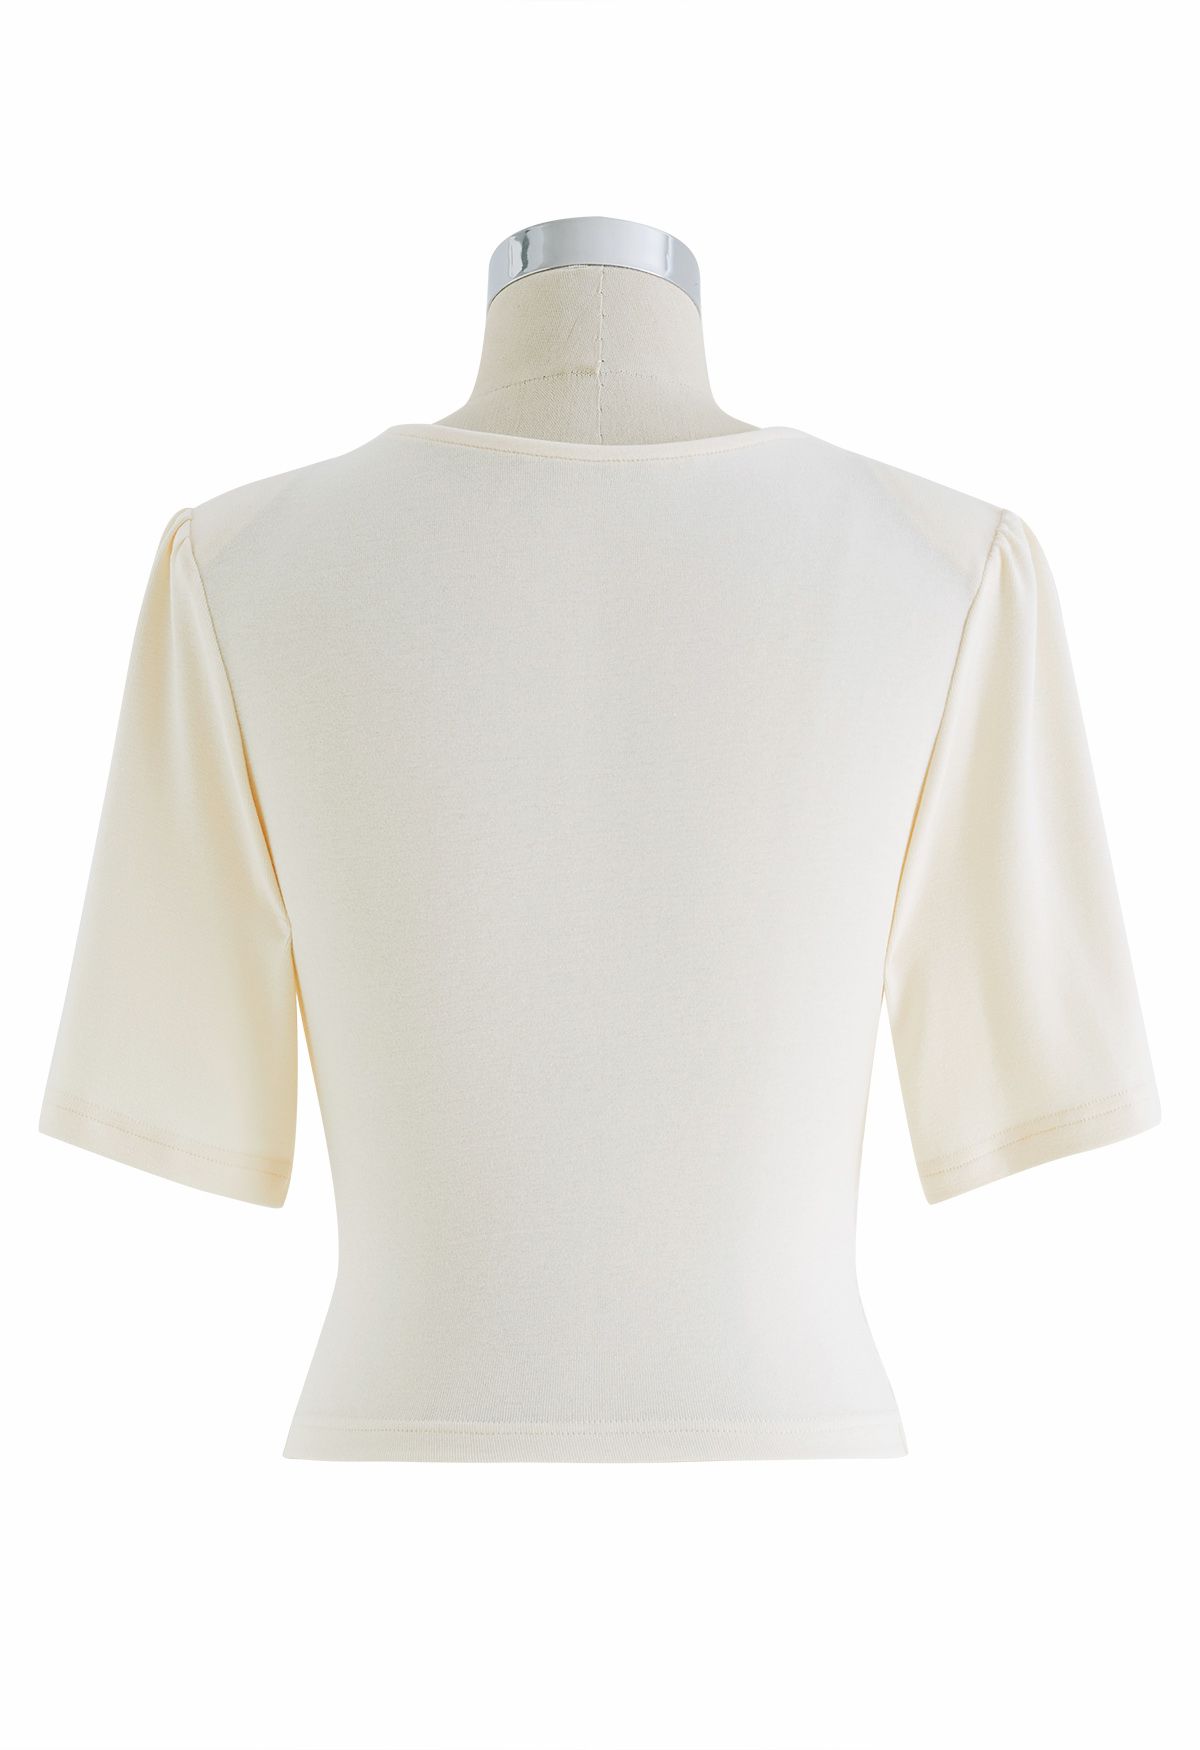 Ruched Waist Faux-Wrap Top in Cream